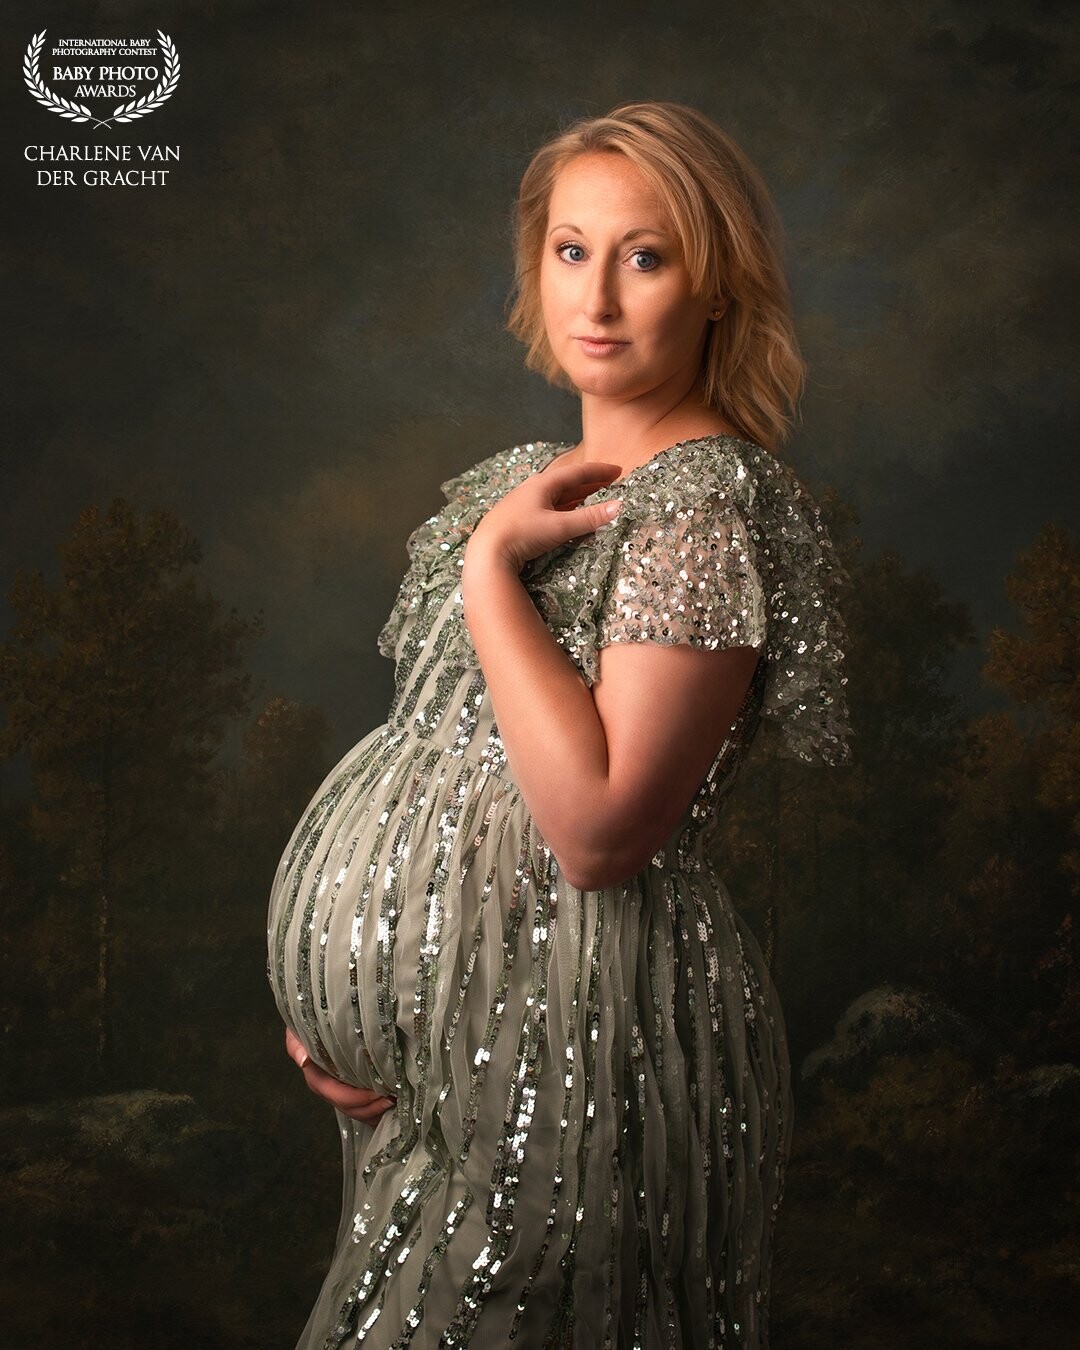 This work of art is created when everything comes together perfectly. I love these colors and the softness of the setting. It is an unforgettable experience when you have yourself photographed in this way. I would like to give this experience to every pregnant woman if I could.